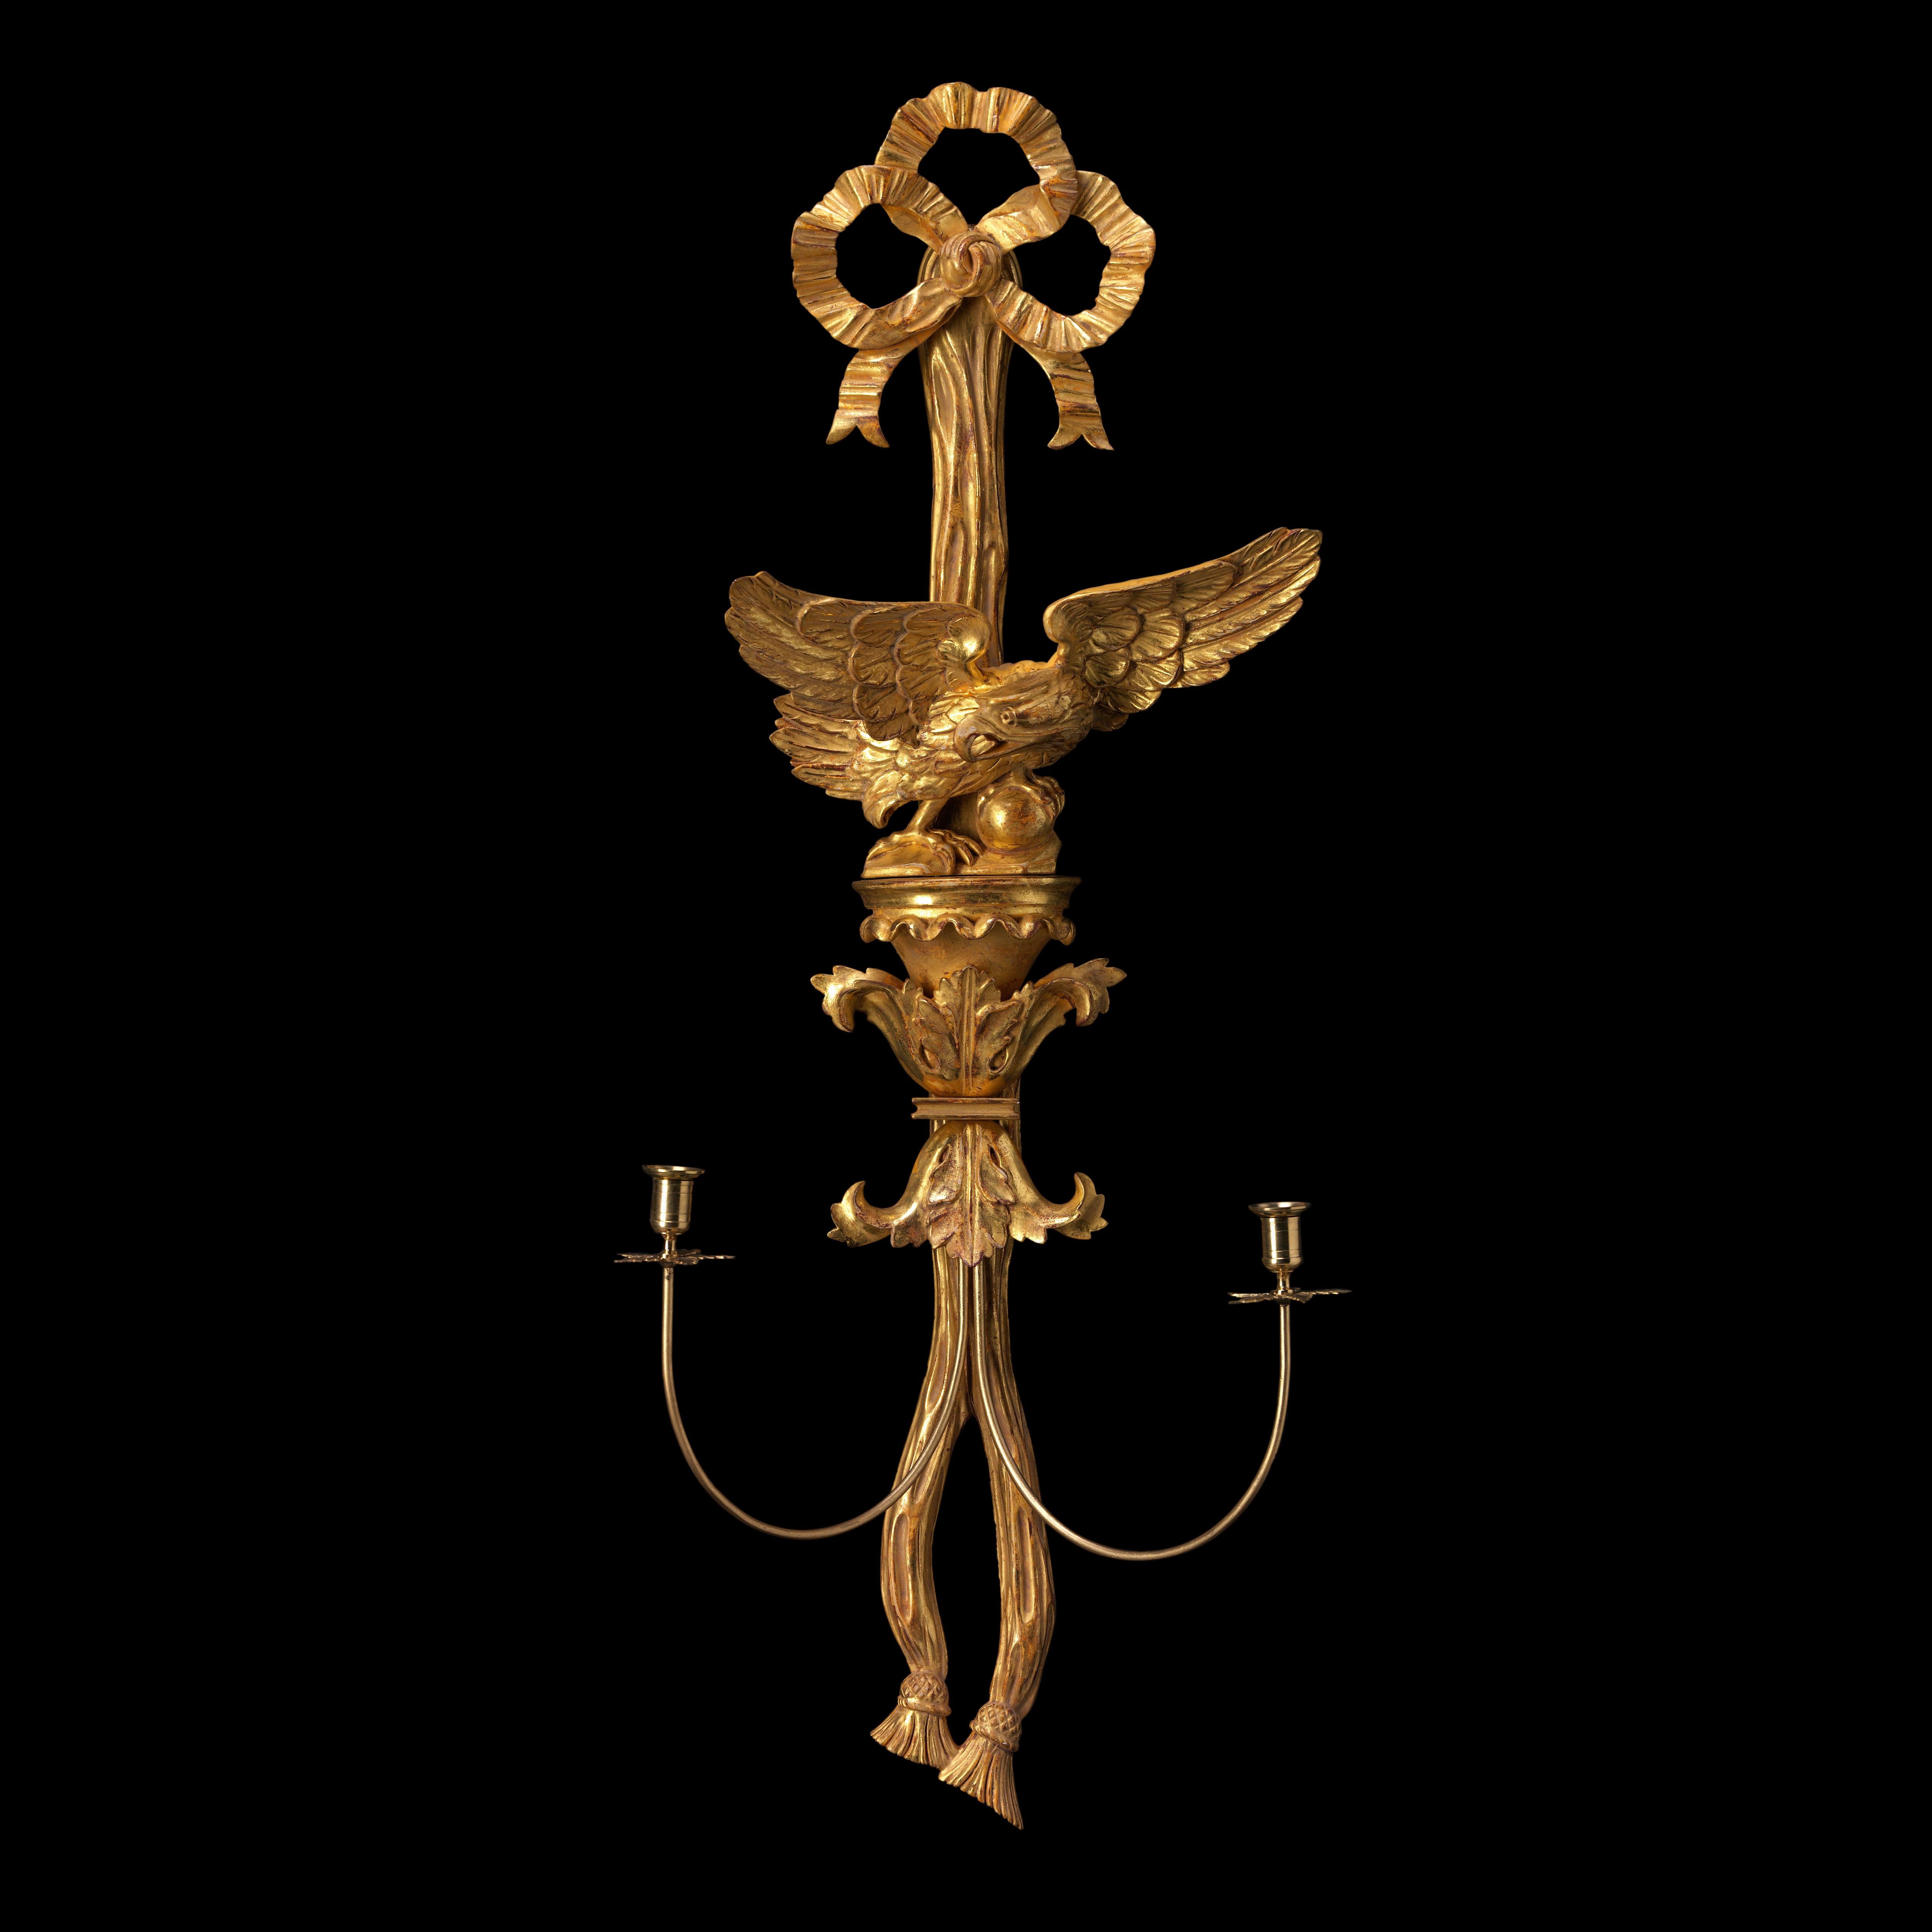 A Regency design carved gilded wood wall light in the form of a splayed eagle standing on acanthus brackets, supported by stylised ribbons.

Bespoke sizing, design adaptations and finishing available.

We are currently working to a 30-36 week